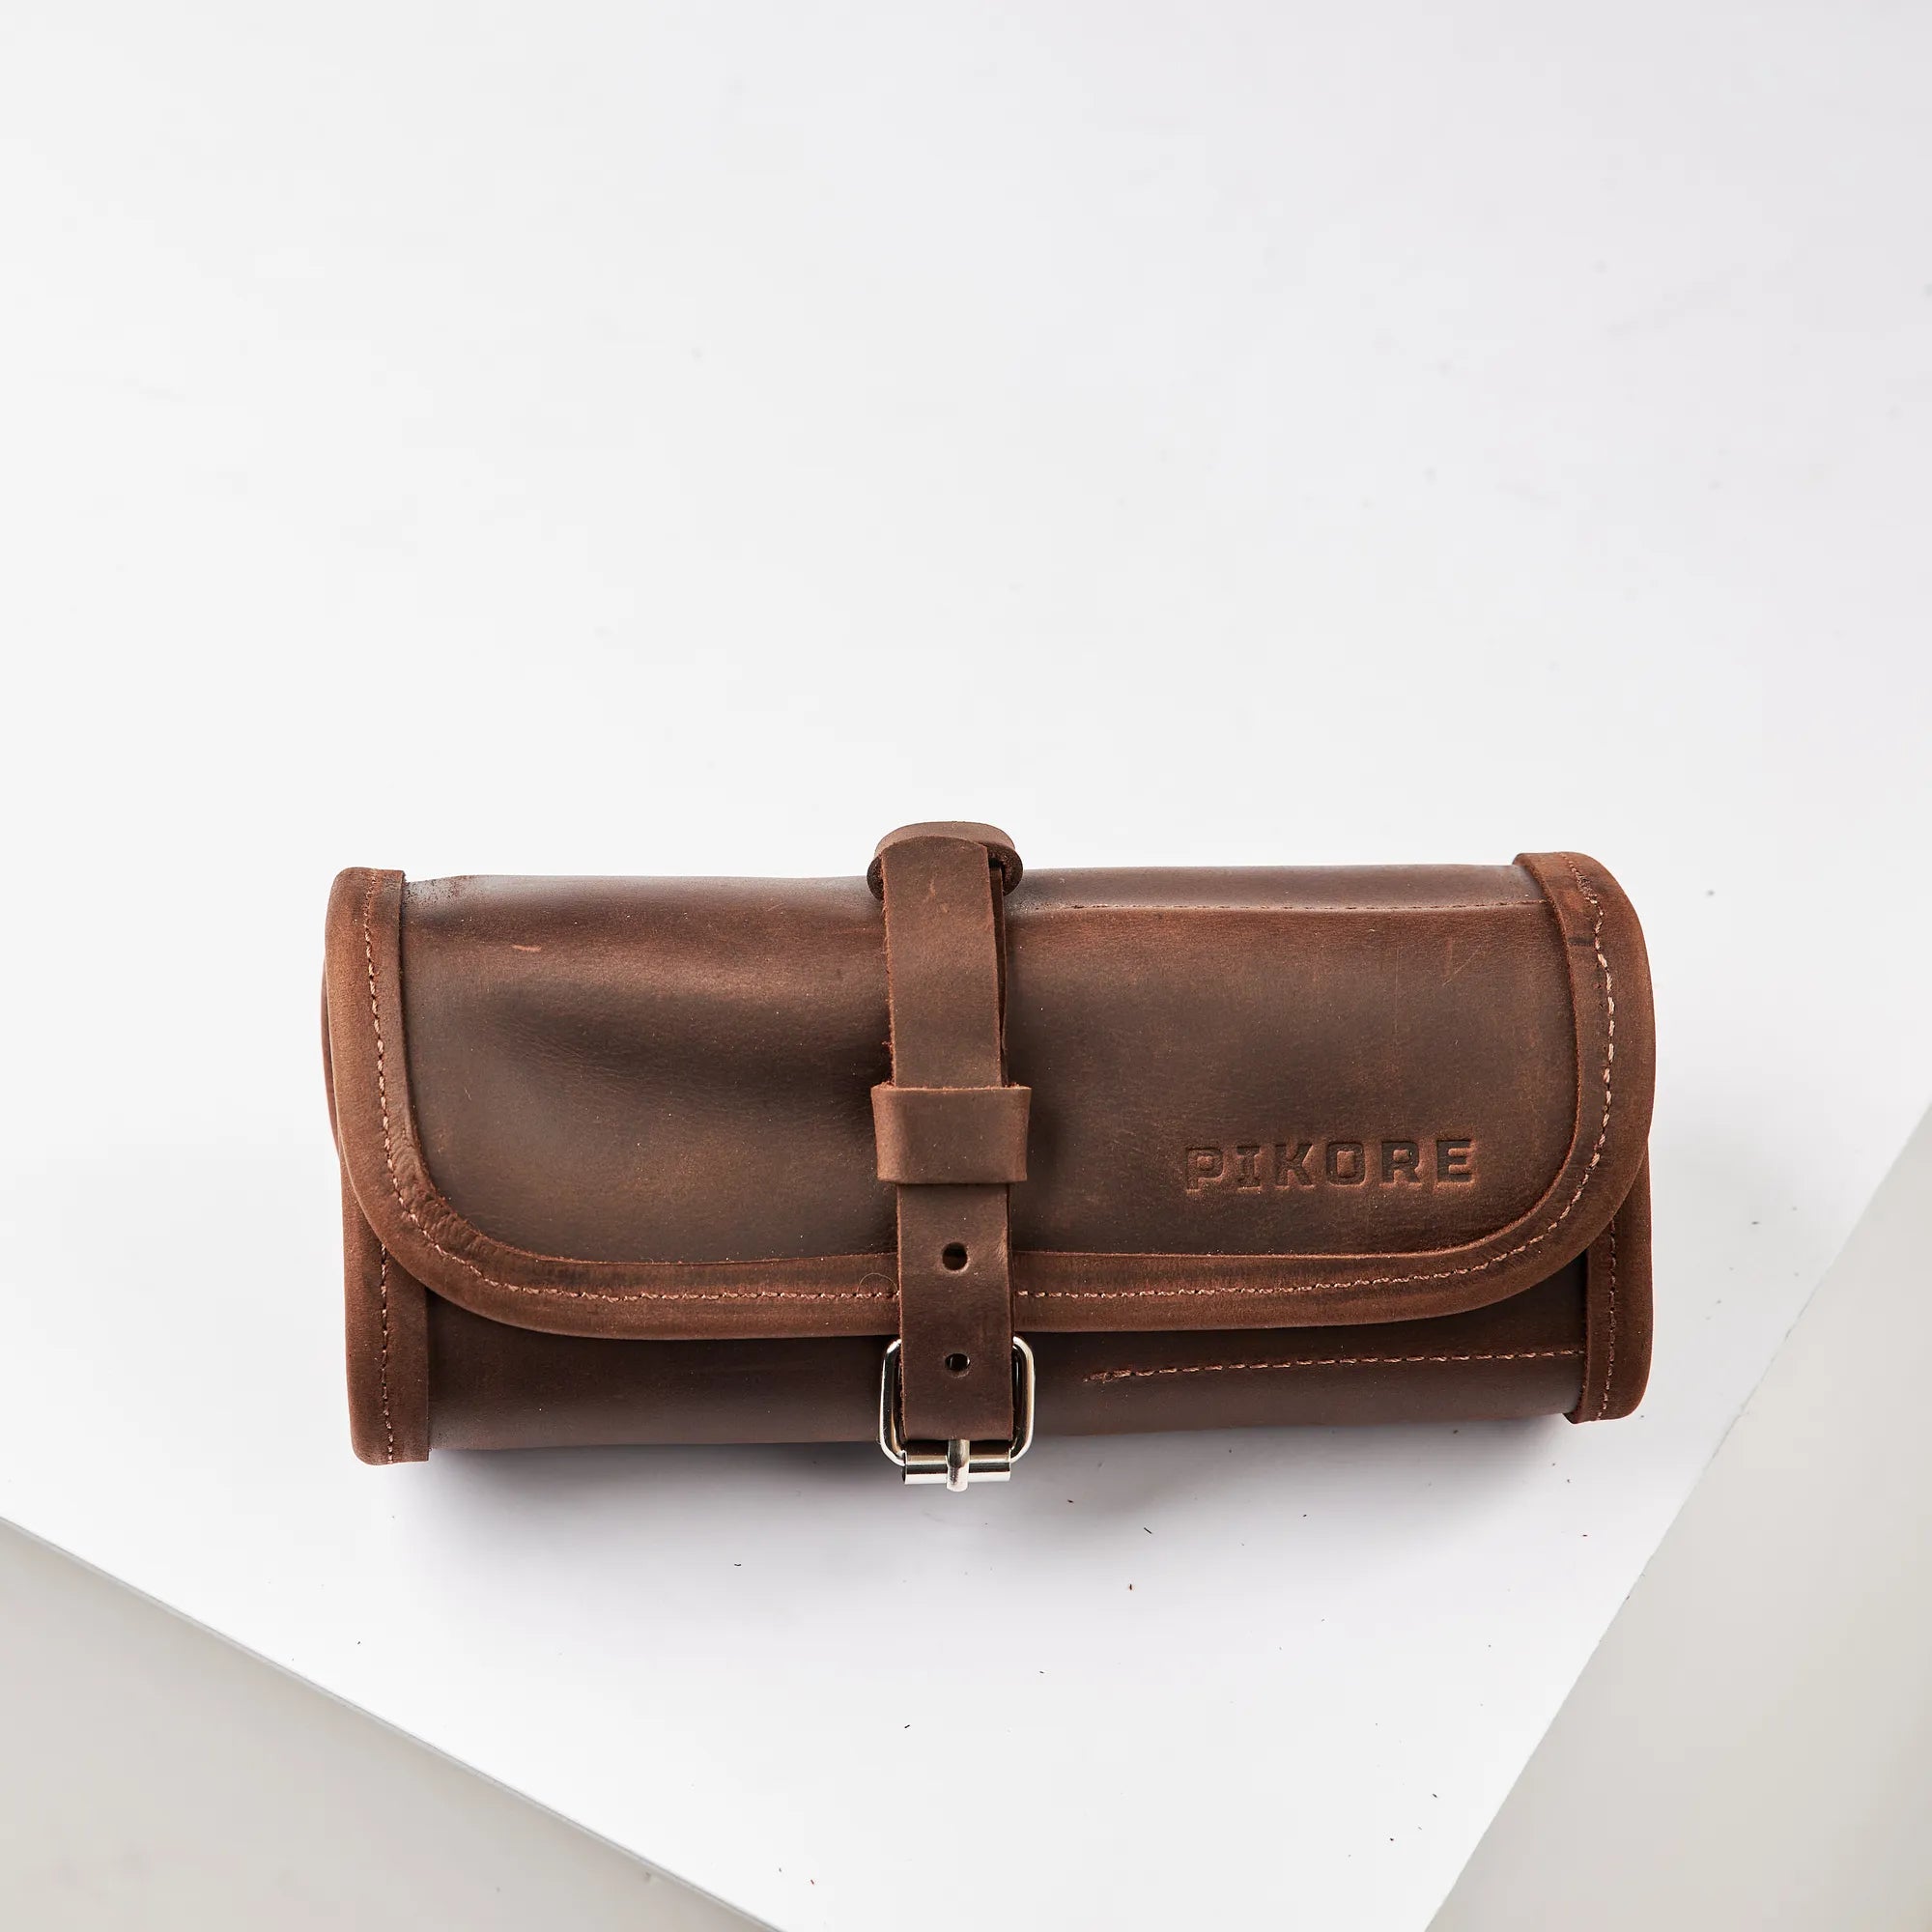 Leather Watch Roll